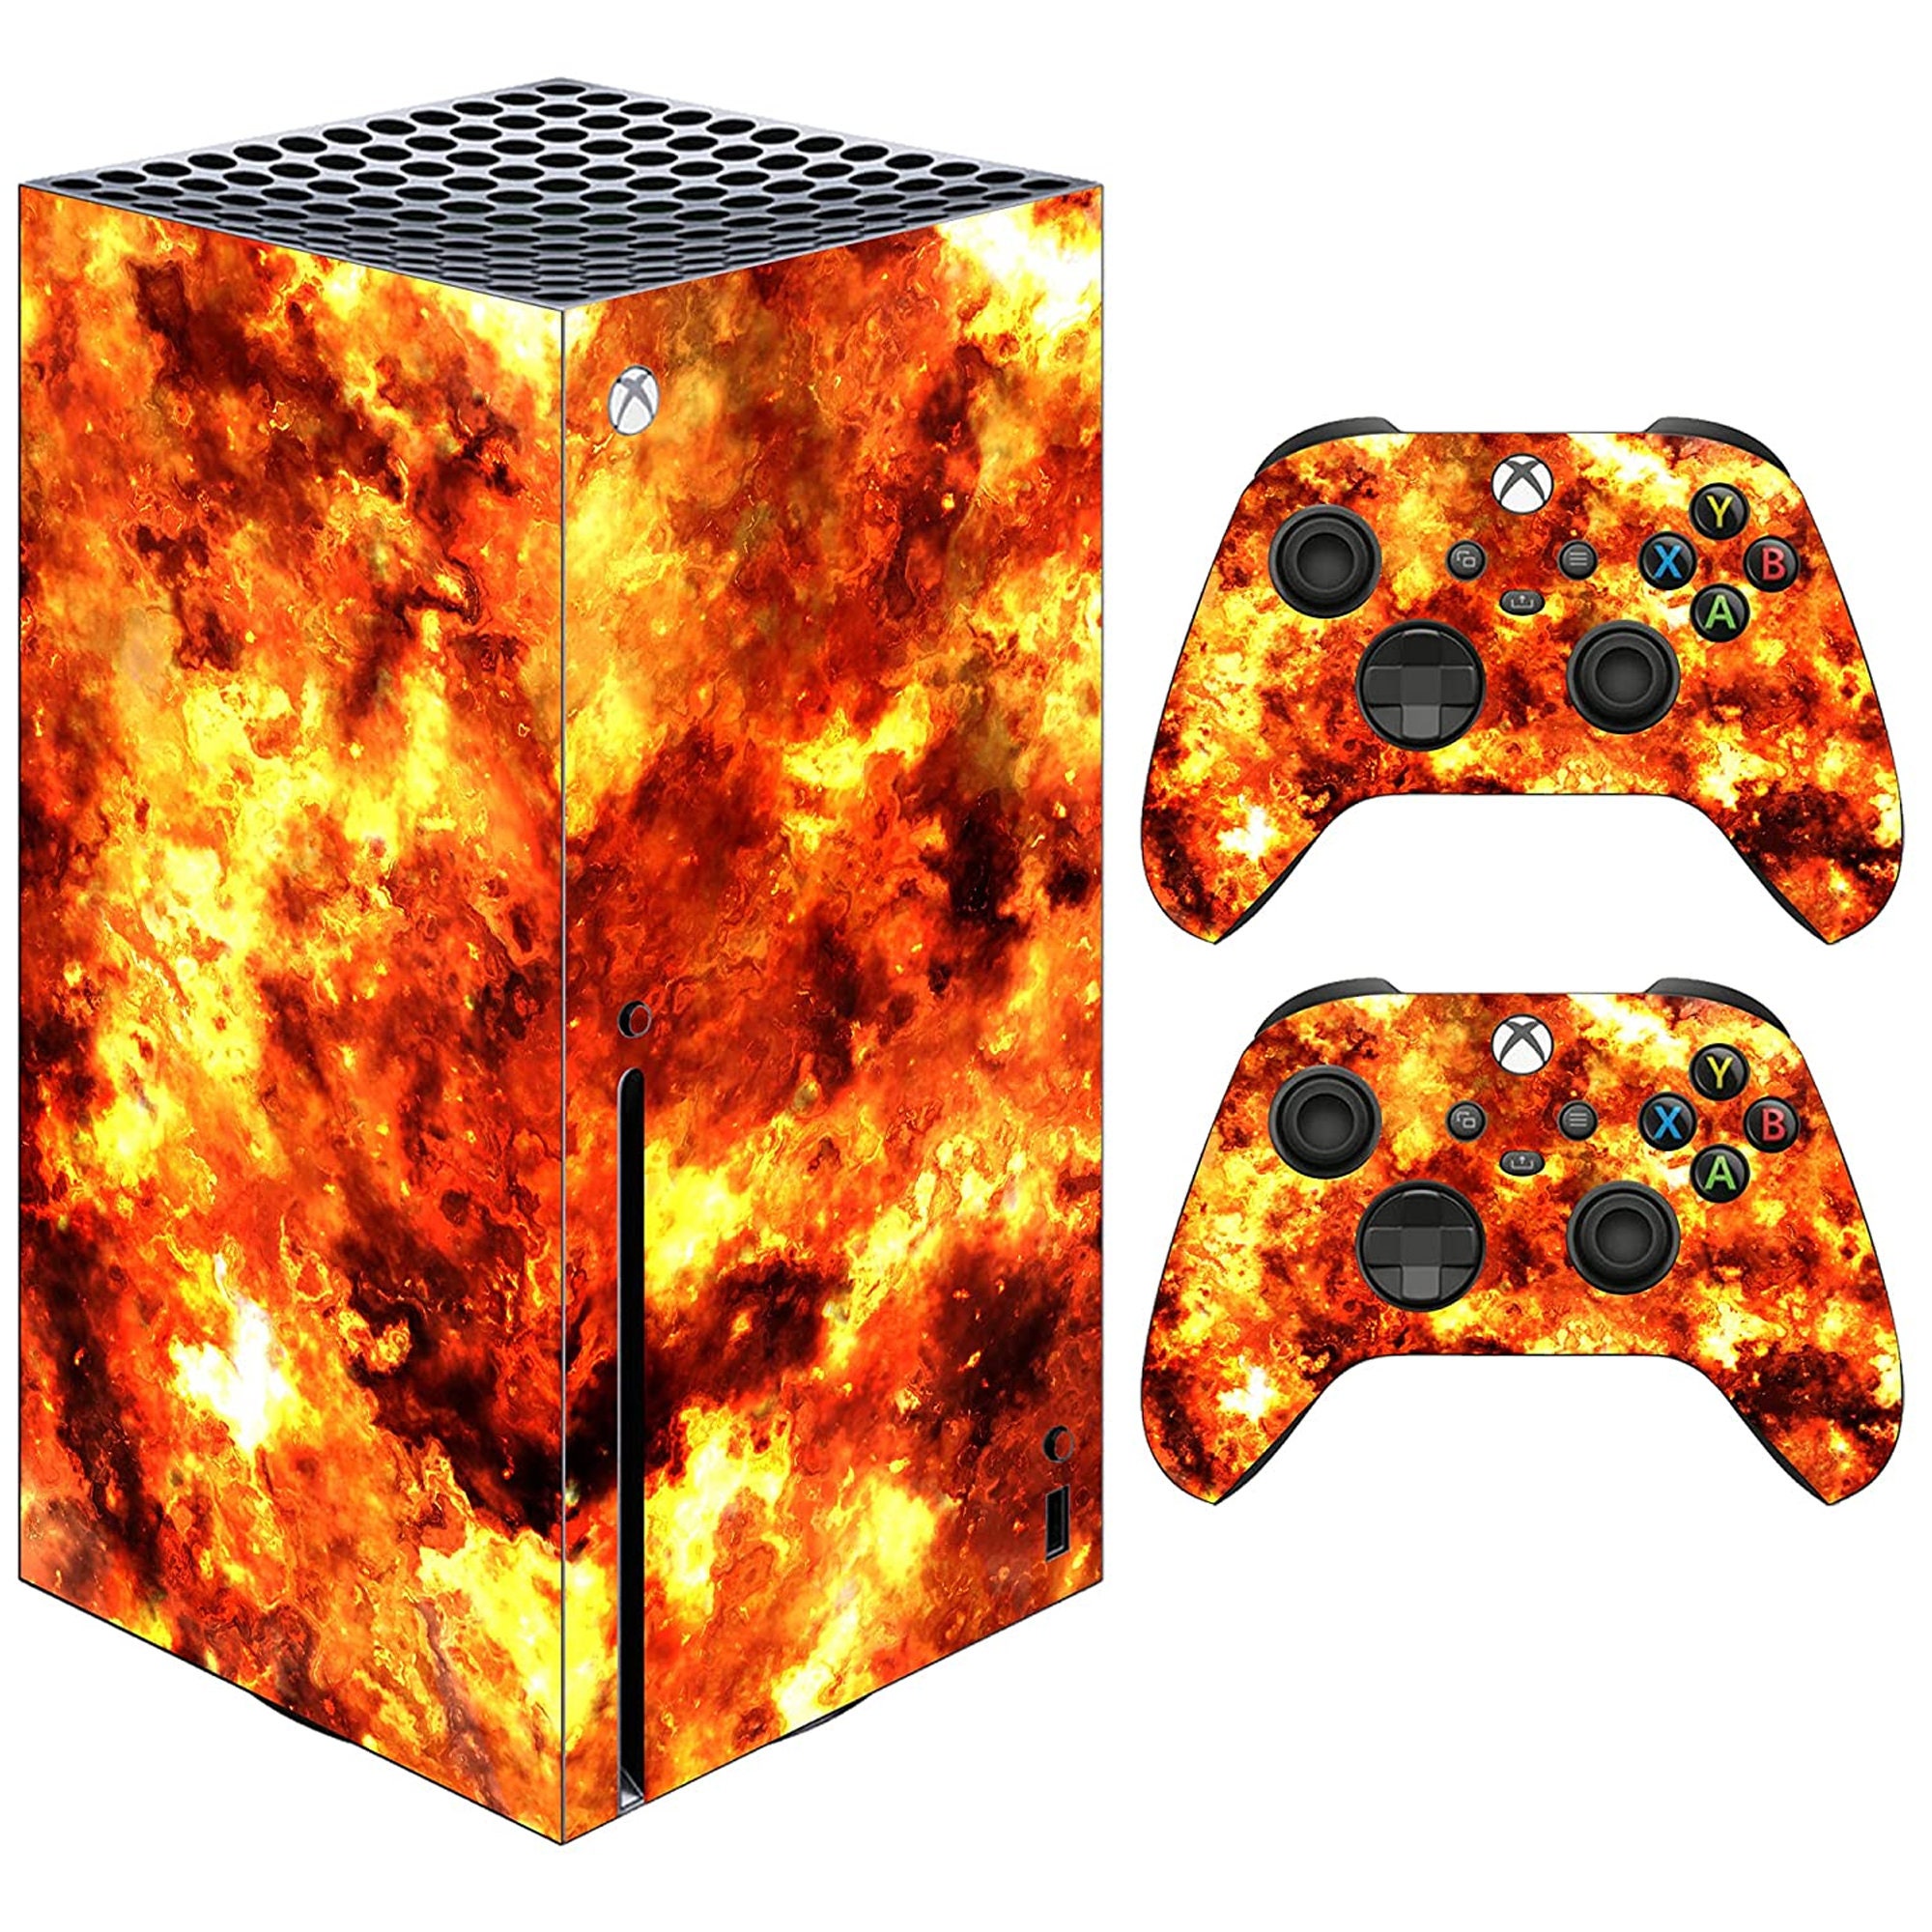 Fire Skin for Xbox Series X Console and Controllers Flames Vinyl